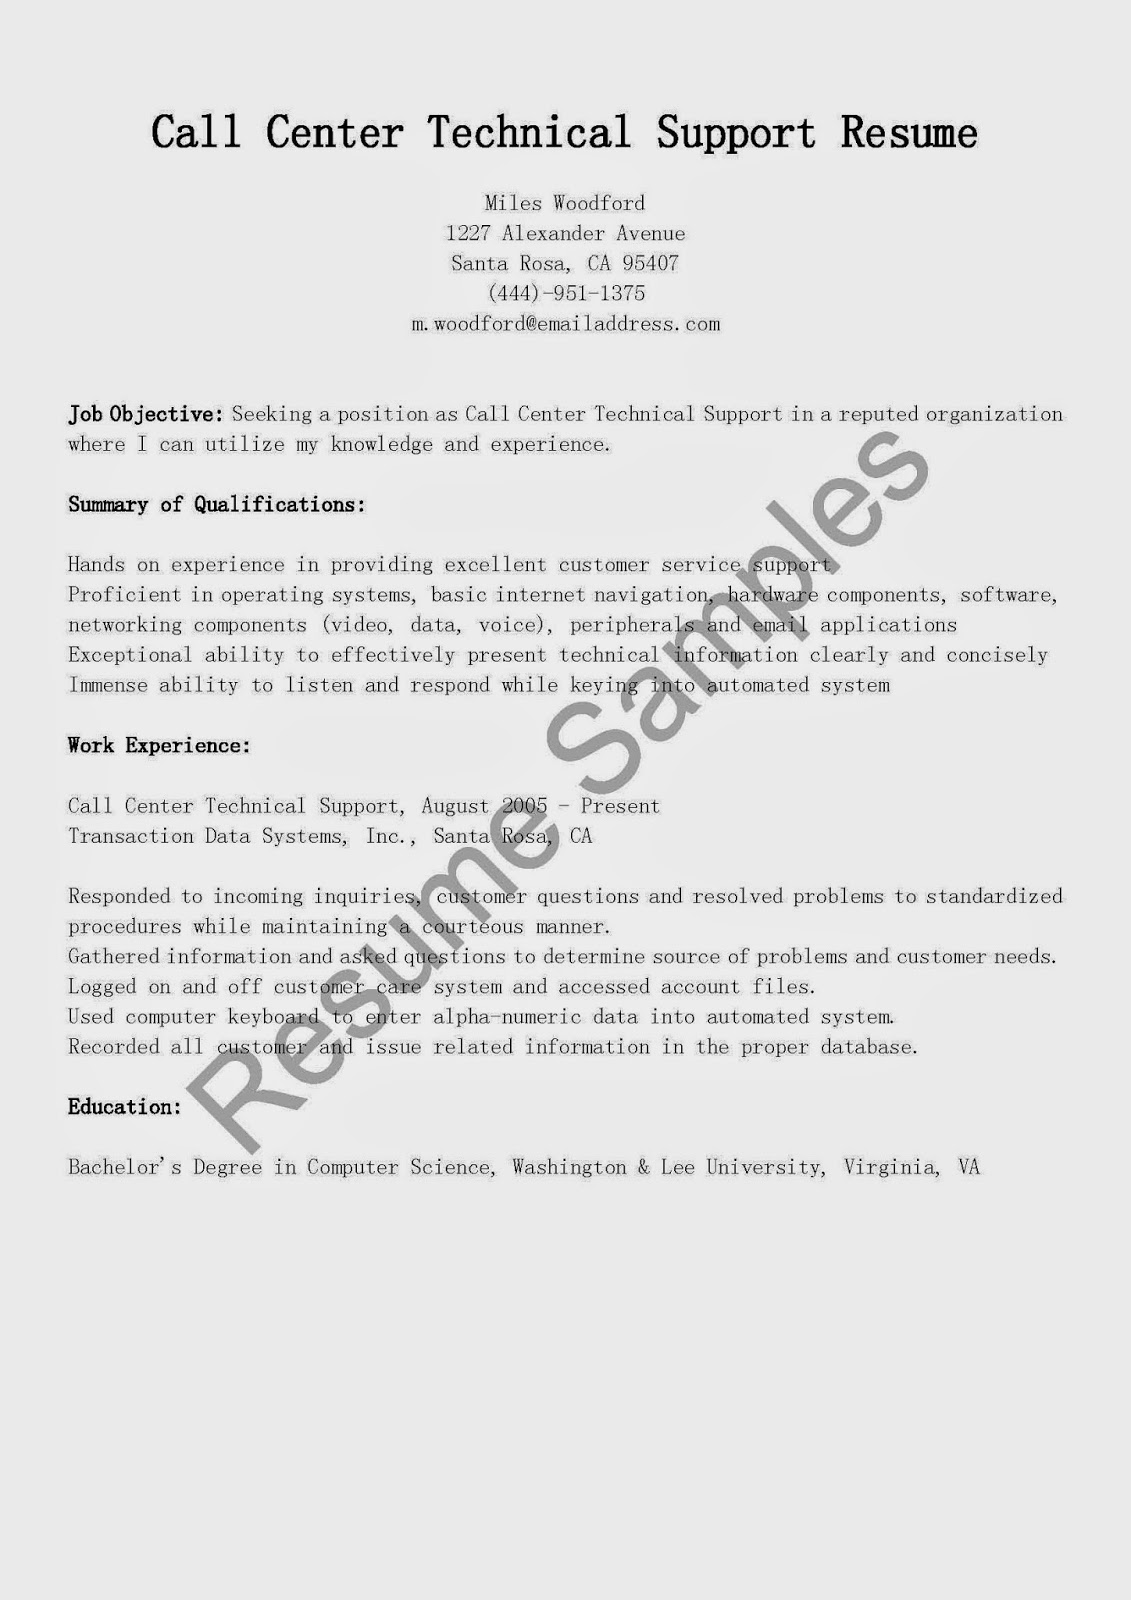 Professional resume writing services in virginia